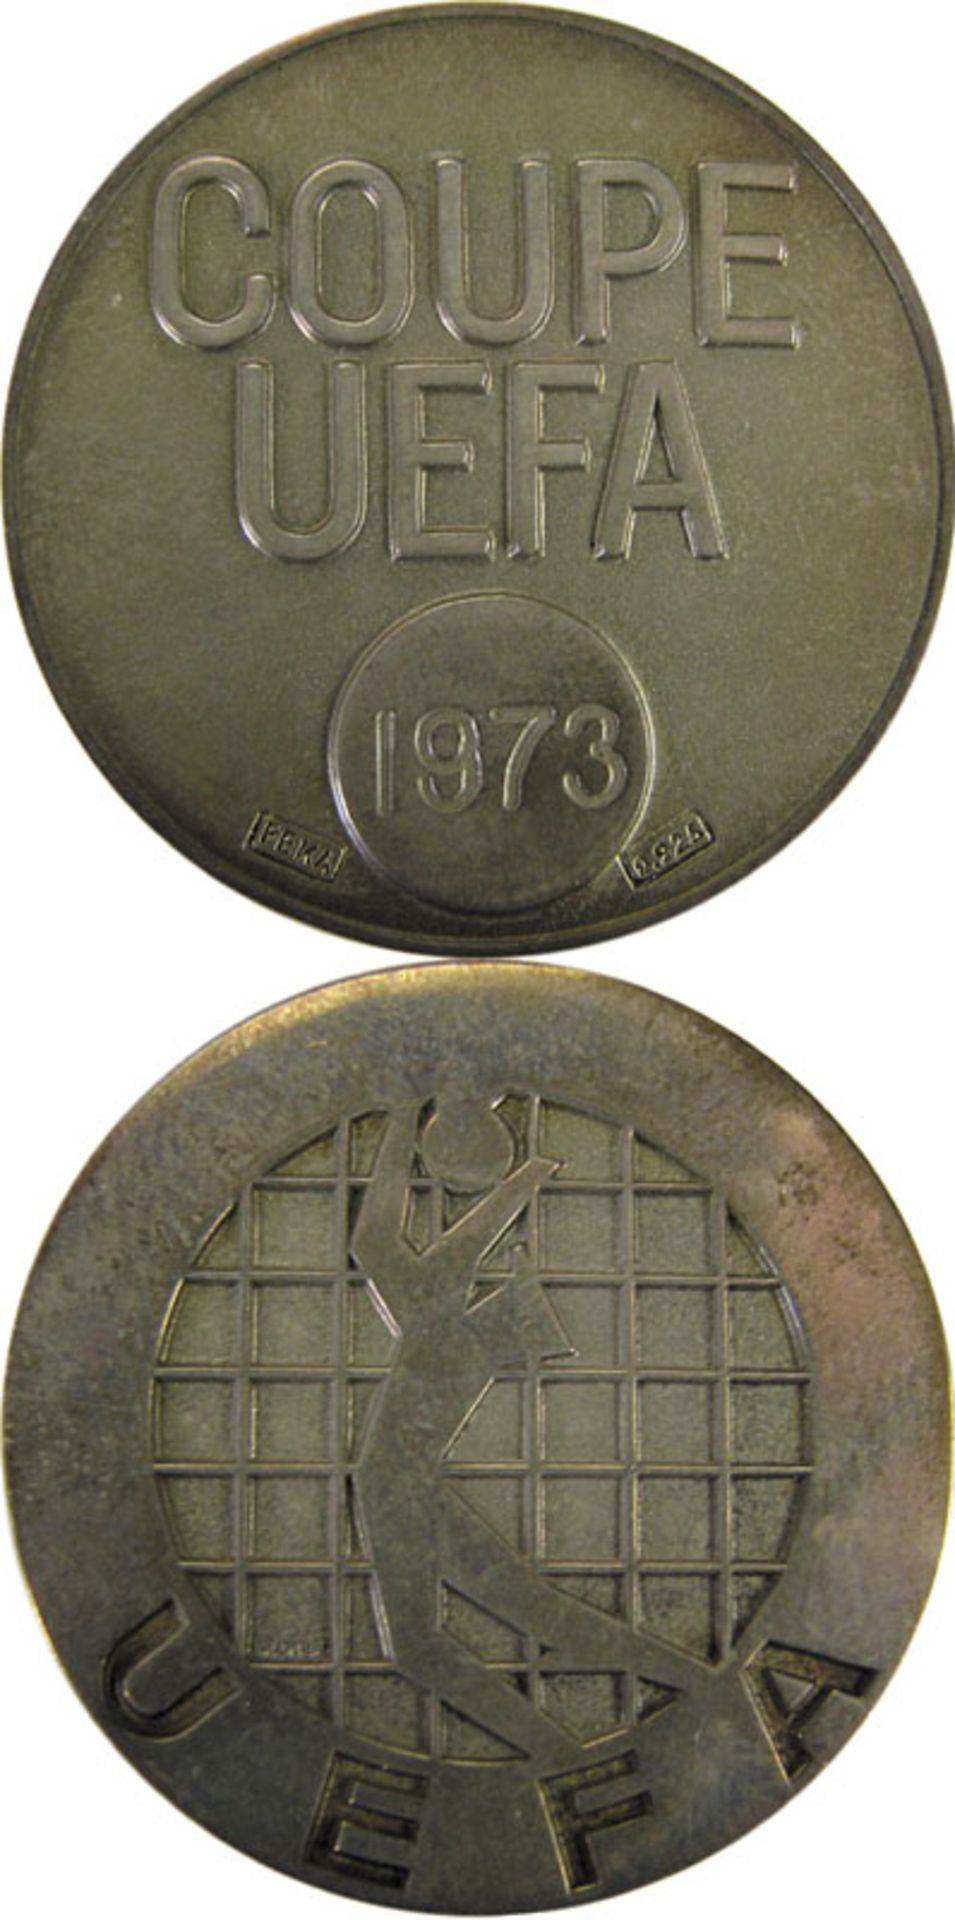 Winner's Medal UEFA Cup 1973 Borussia Moenchengla - Official winner (runners up) medal from Borussia